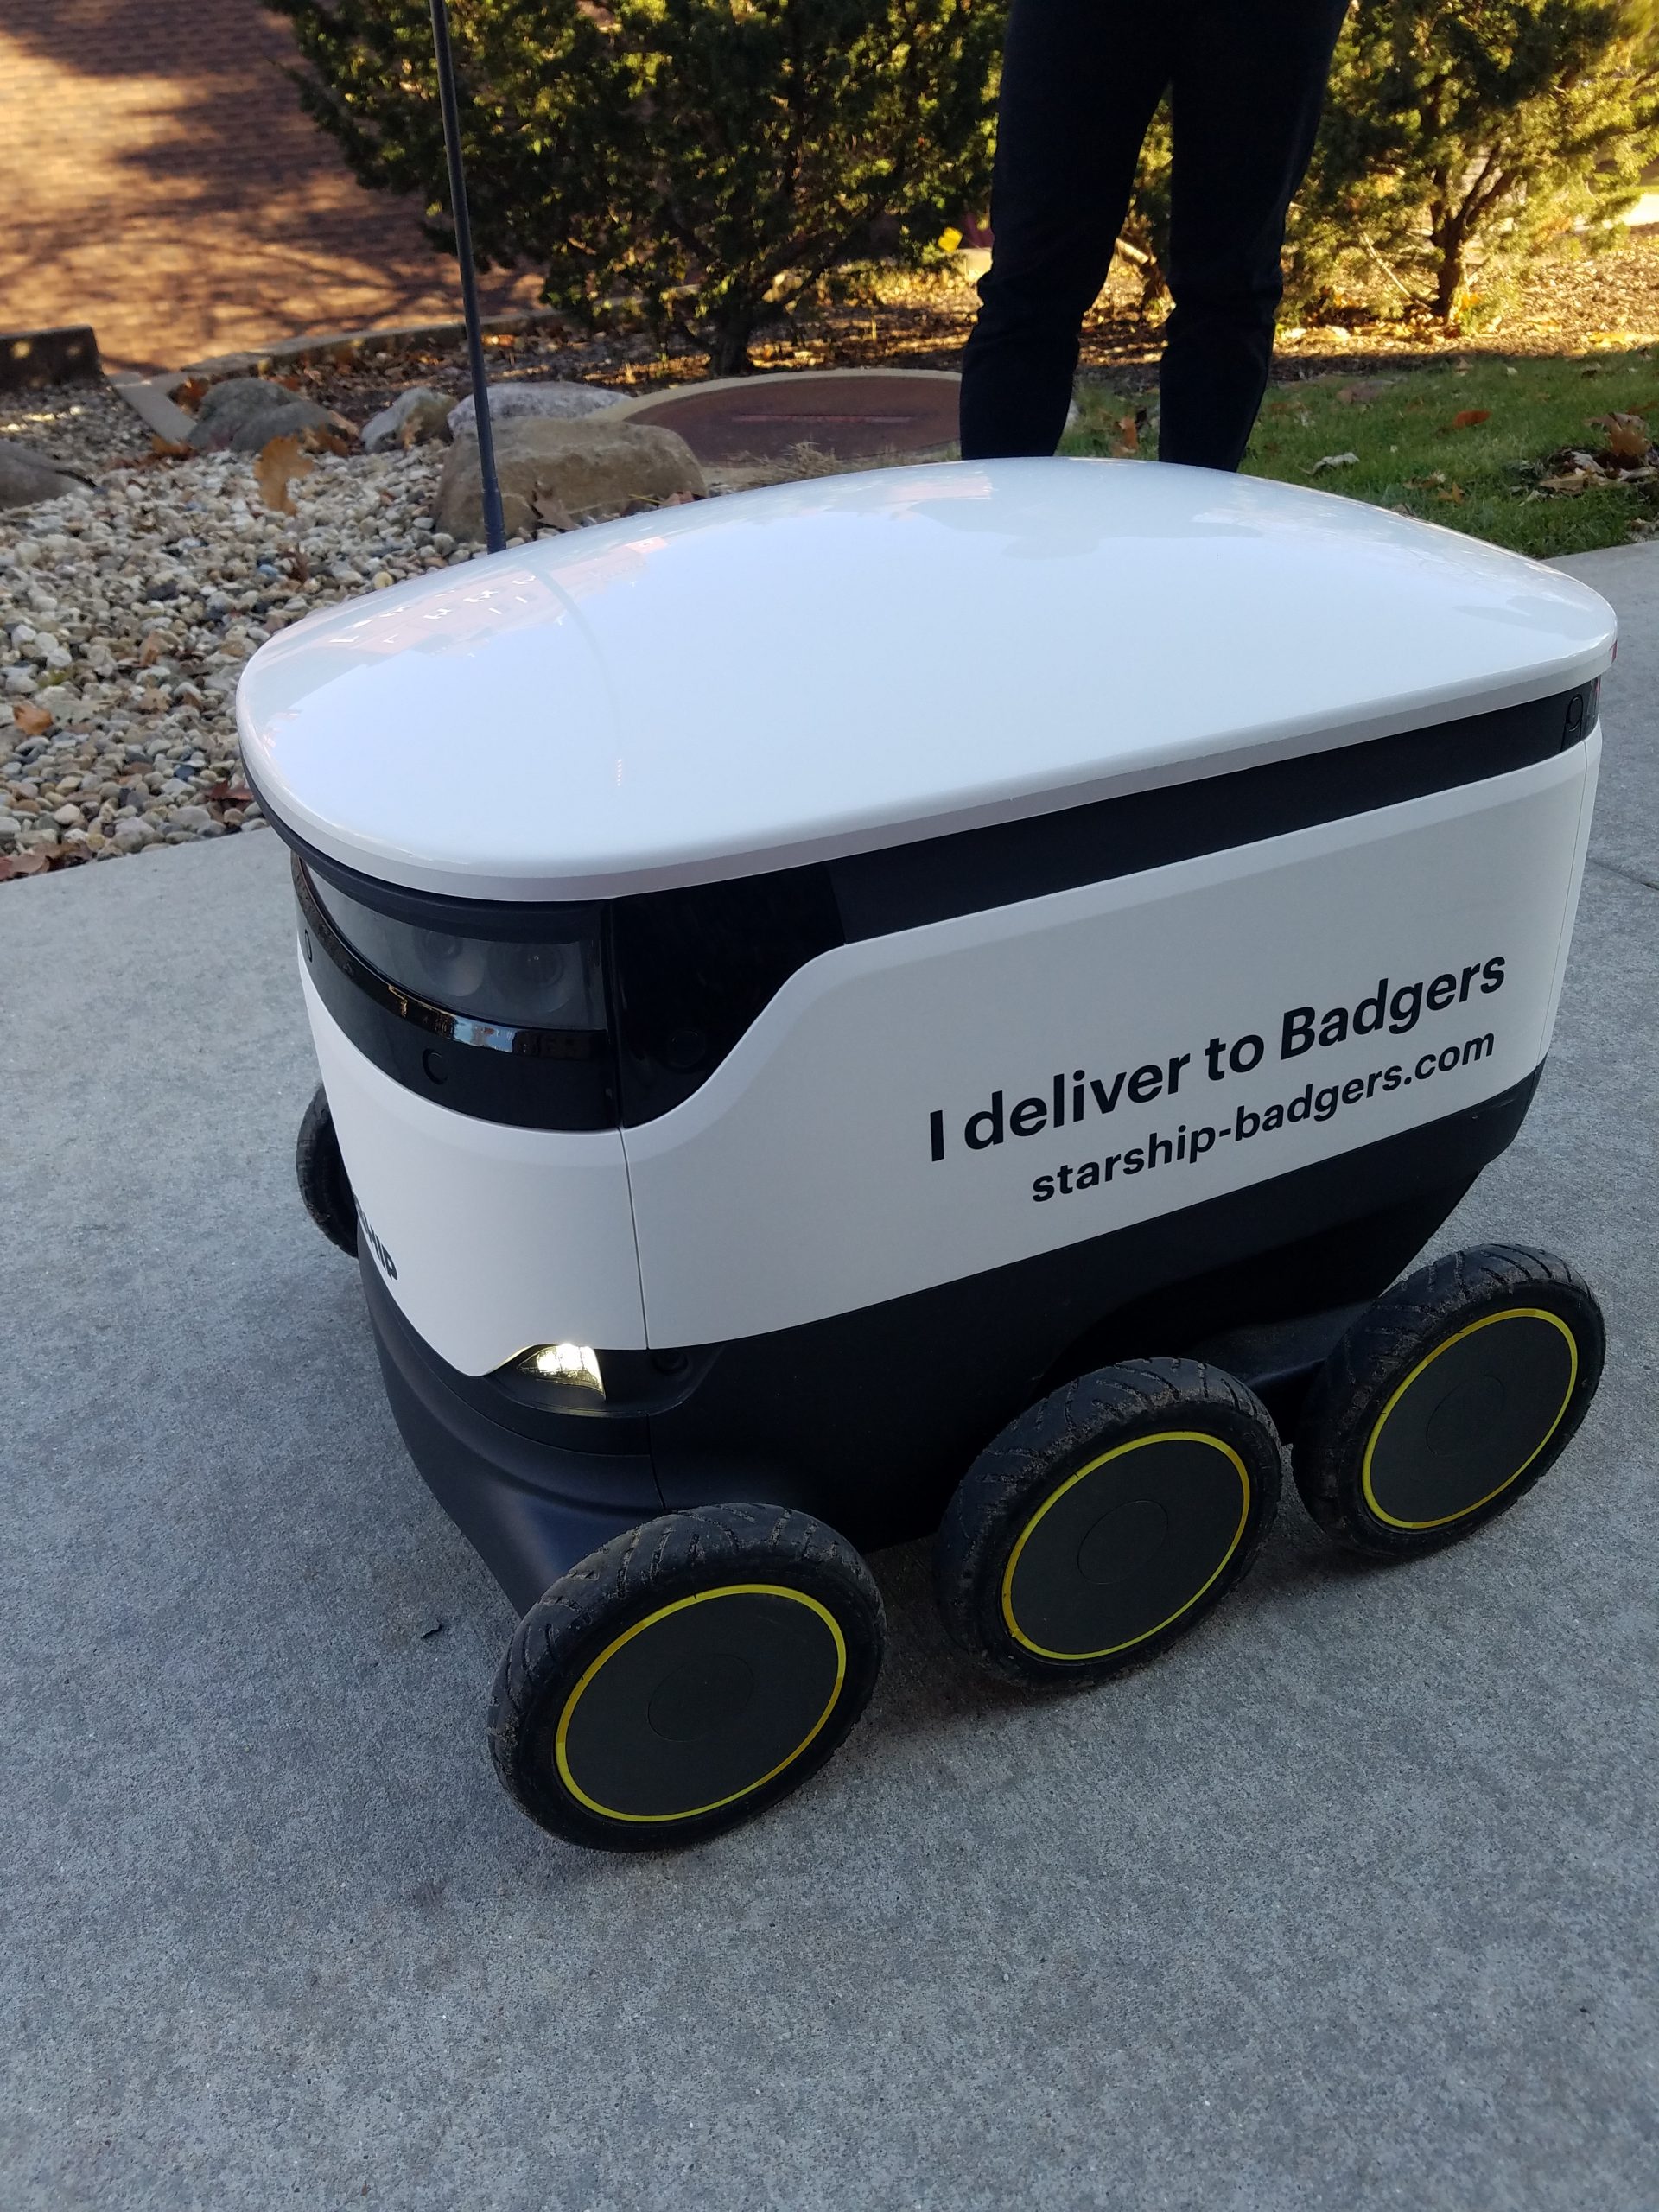 Food service delivery robot